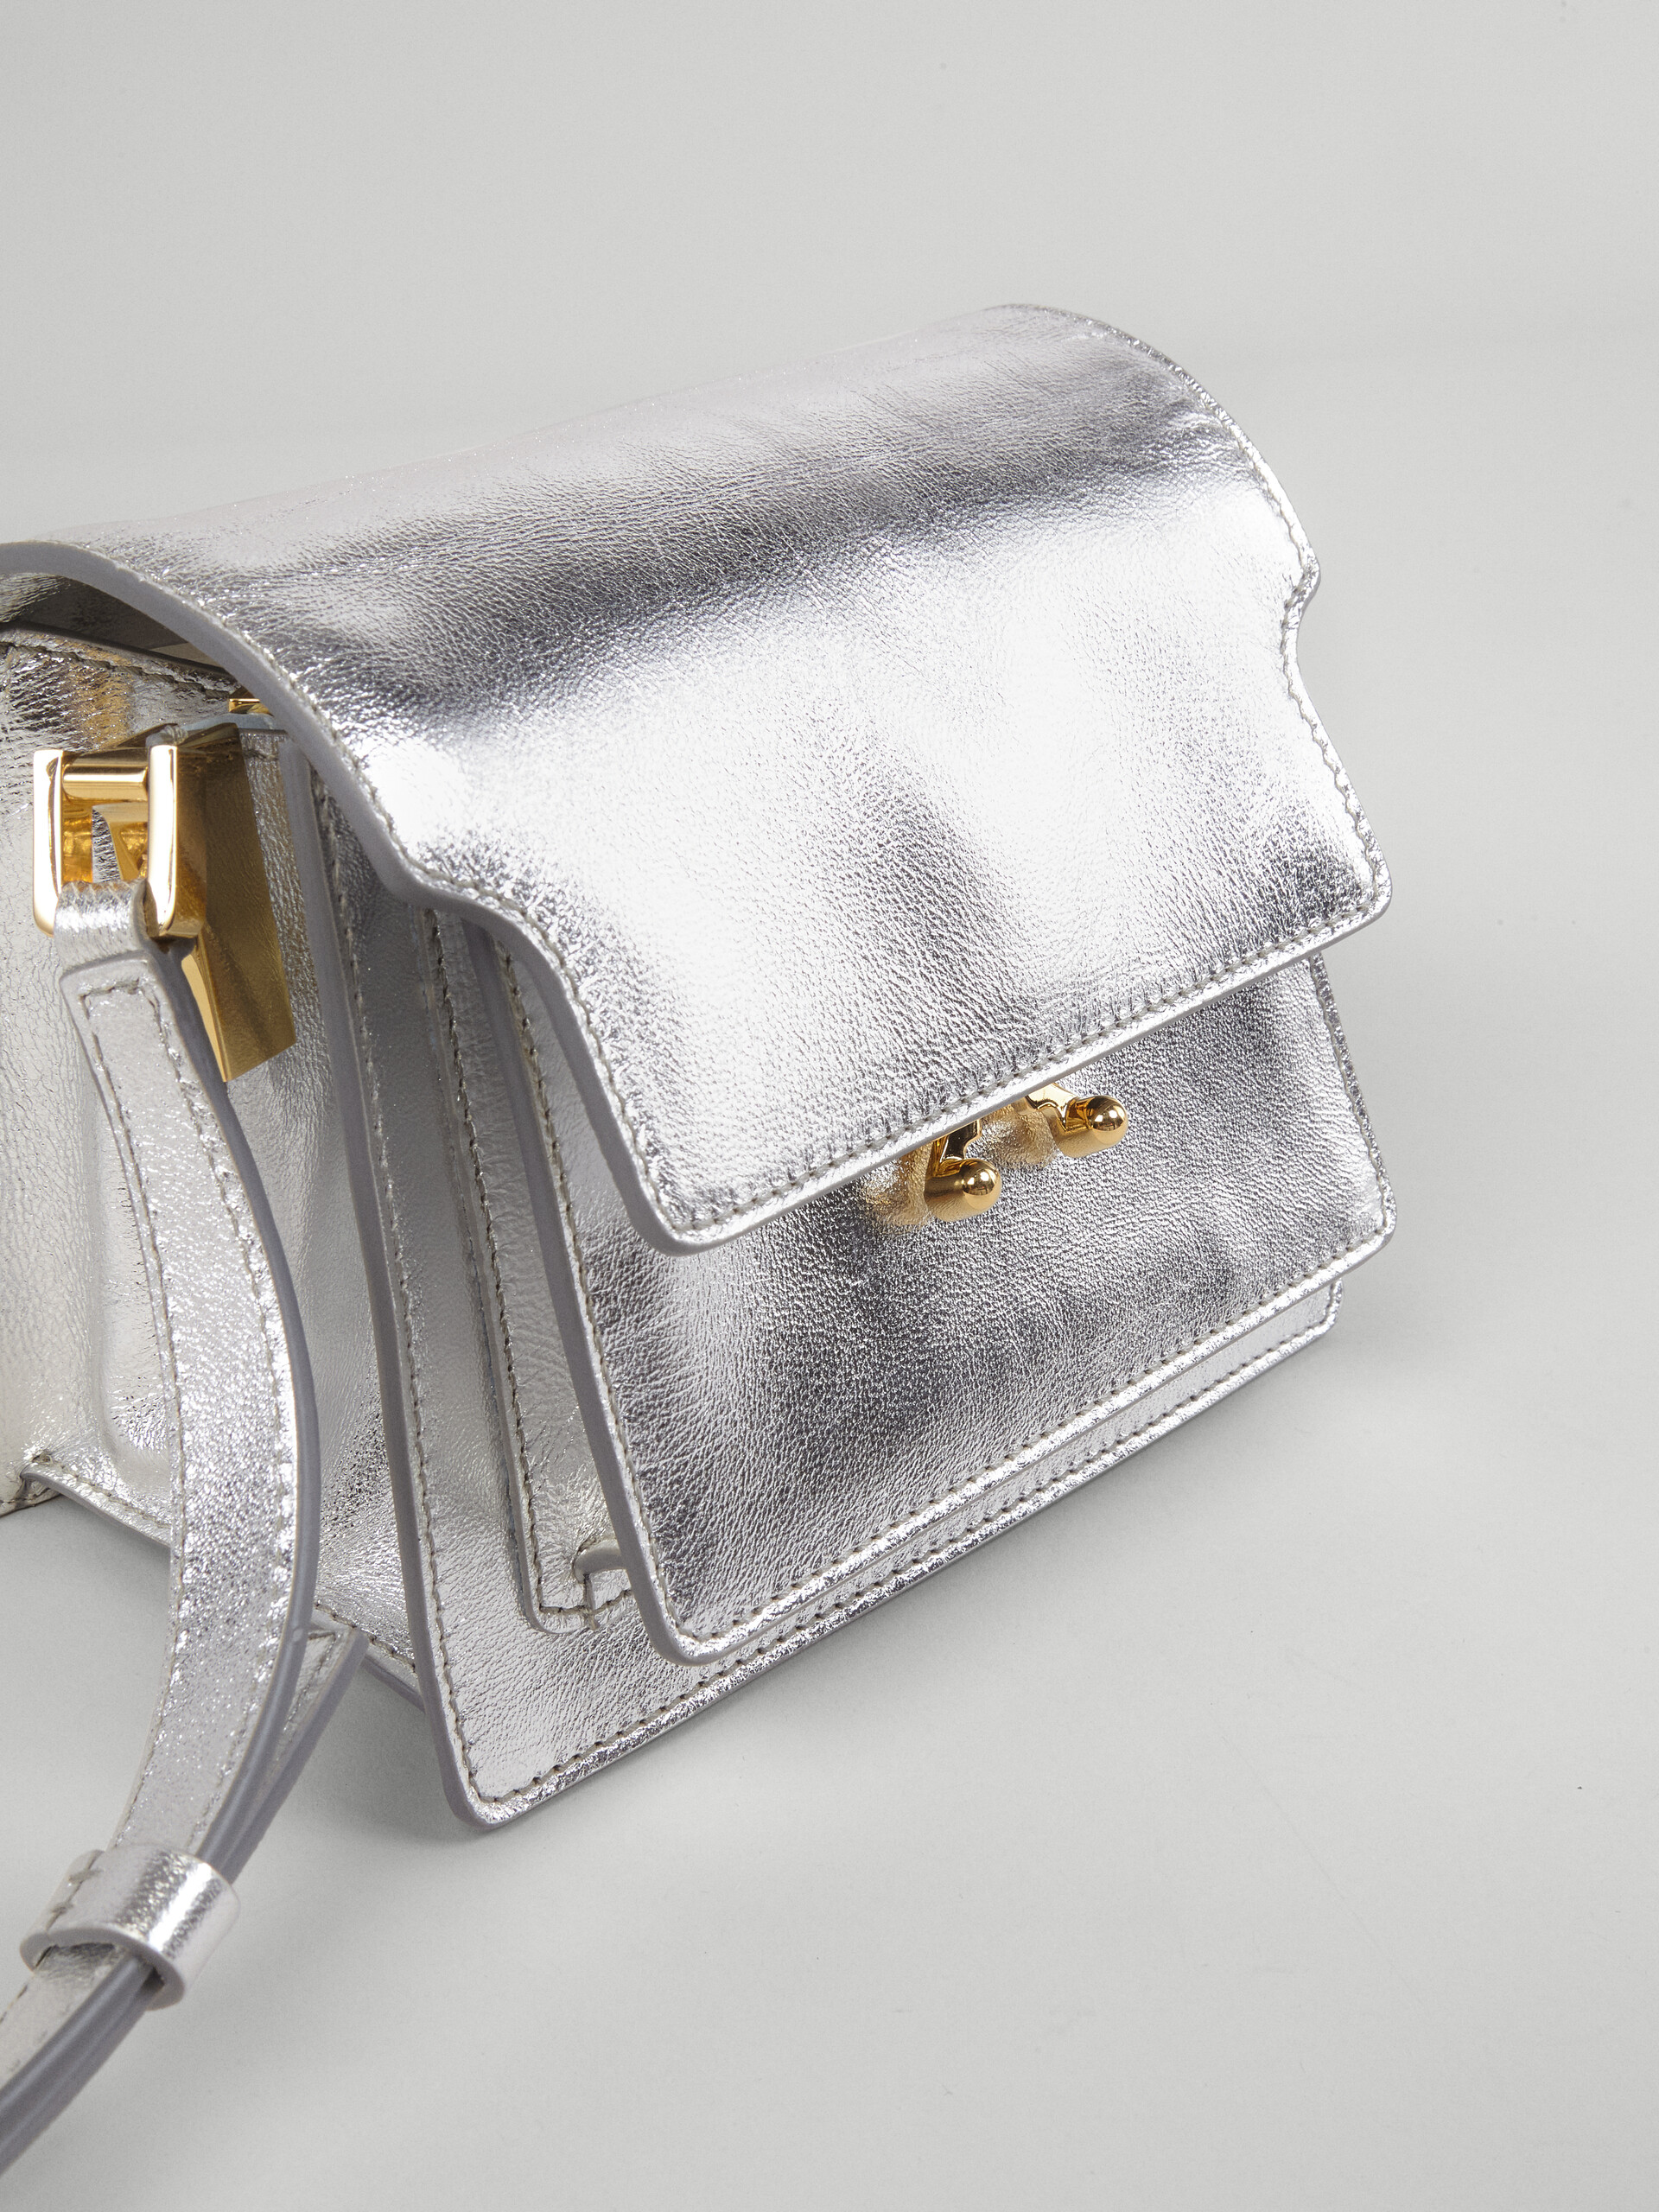 TRUNK SOFT mini bag in silver metallic leather - Shoulder Bags - Image 3